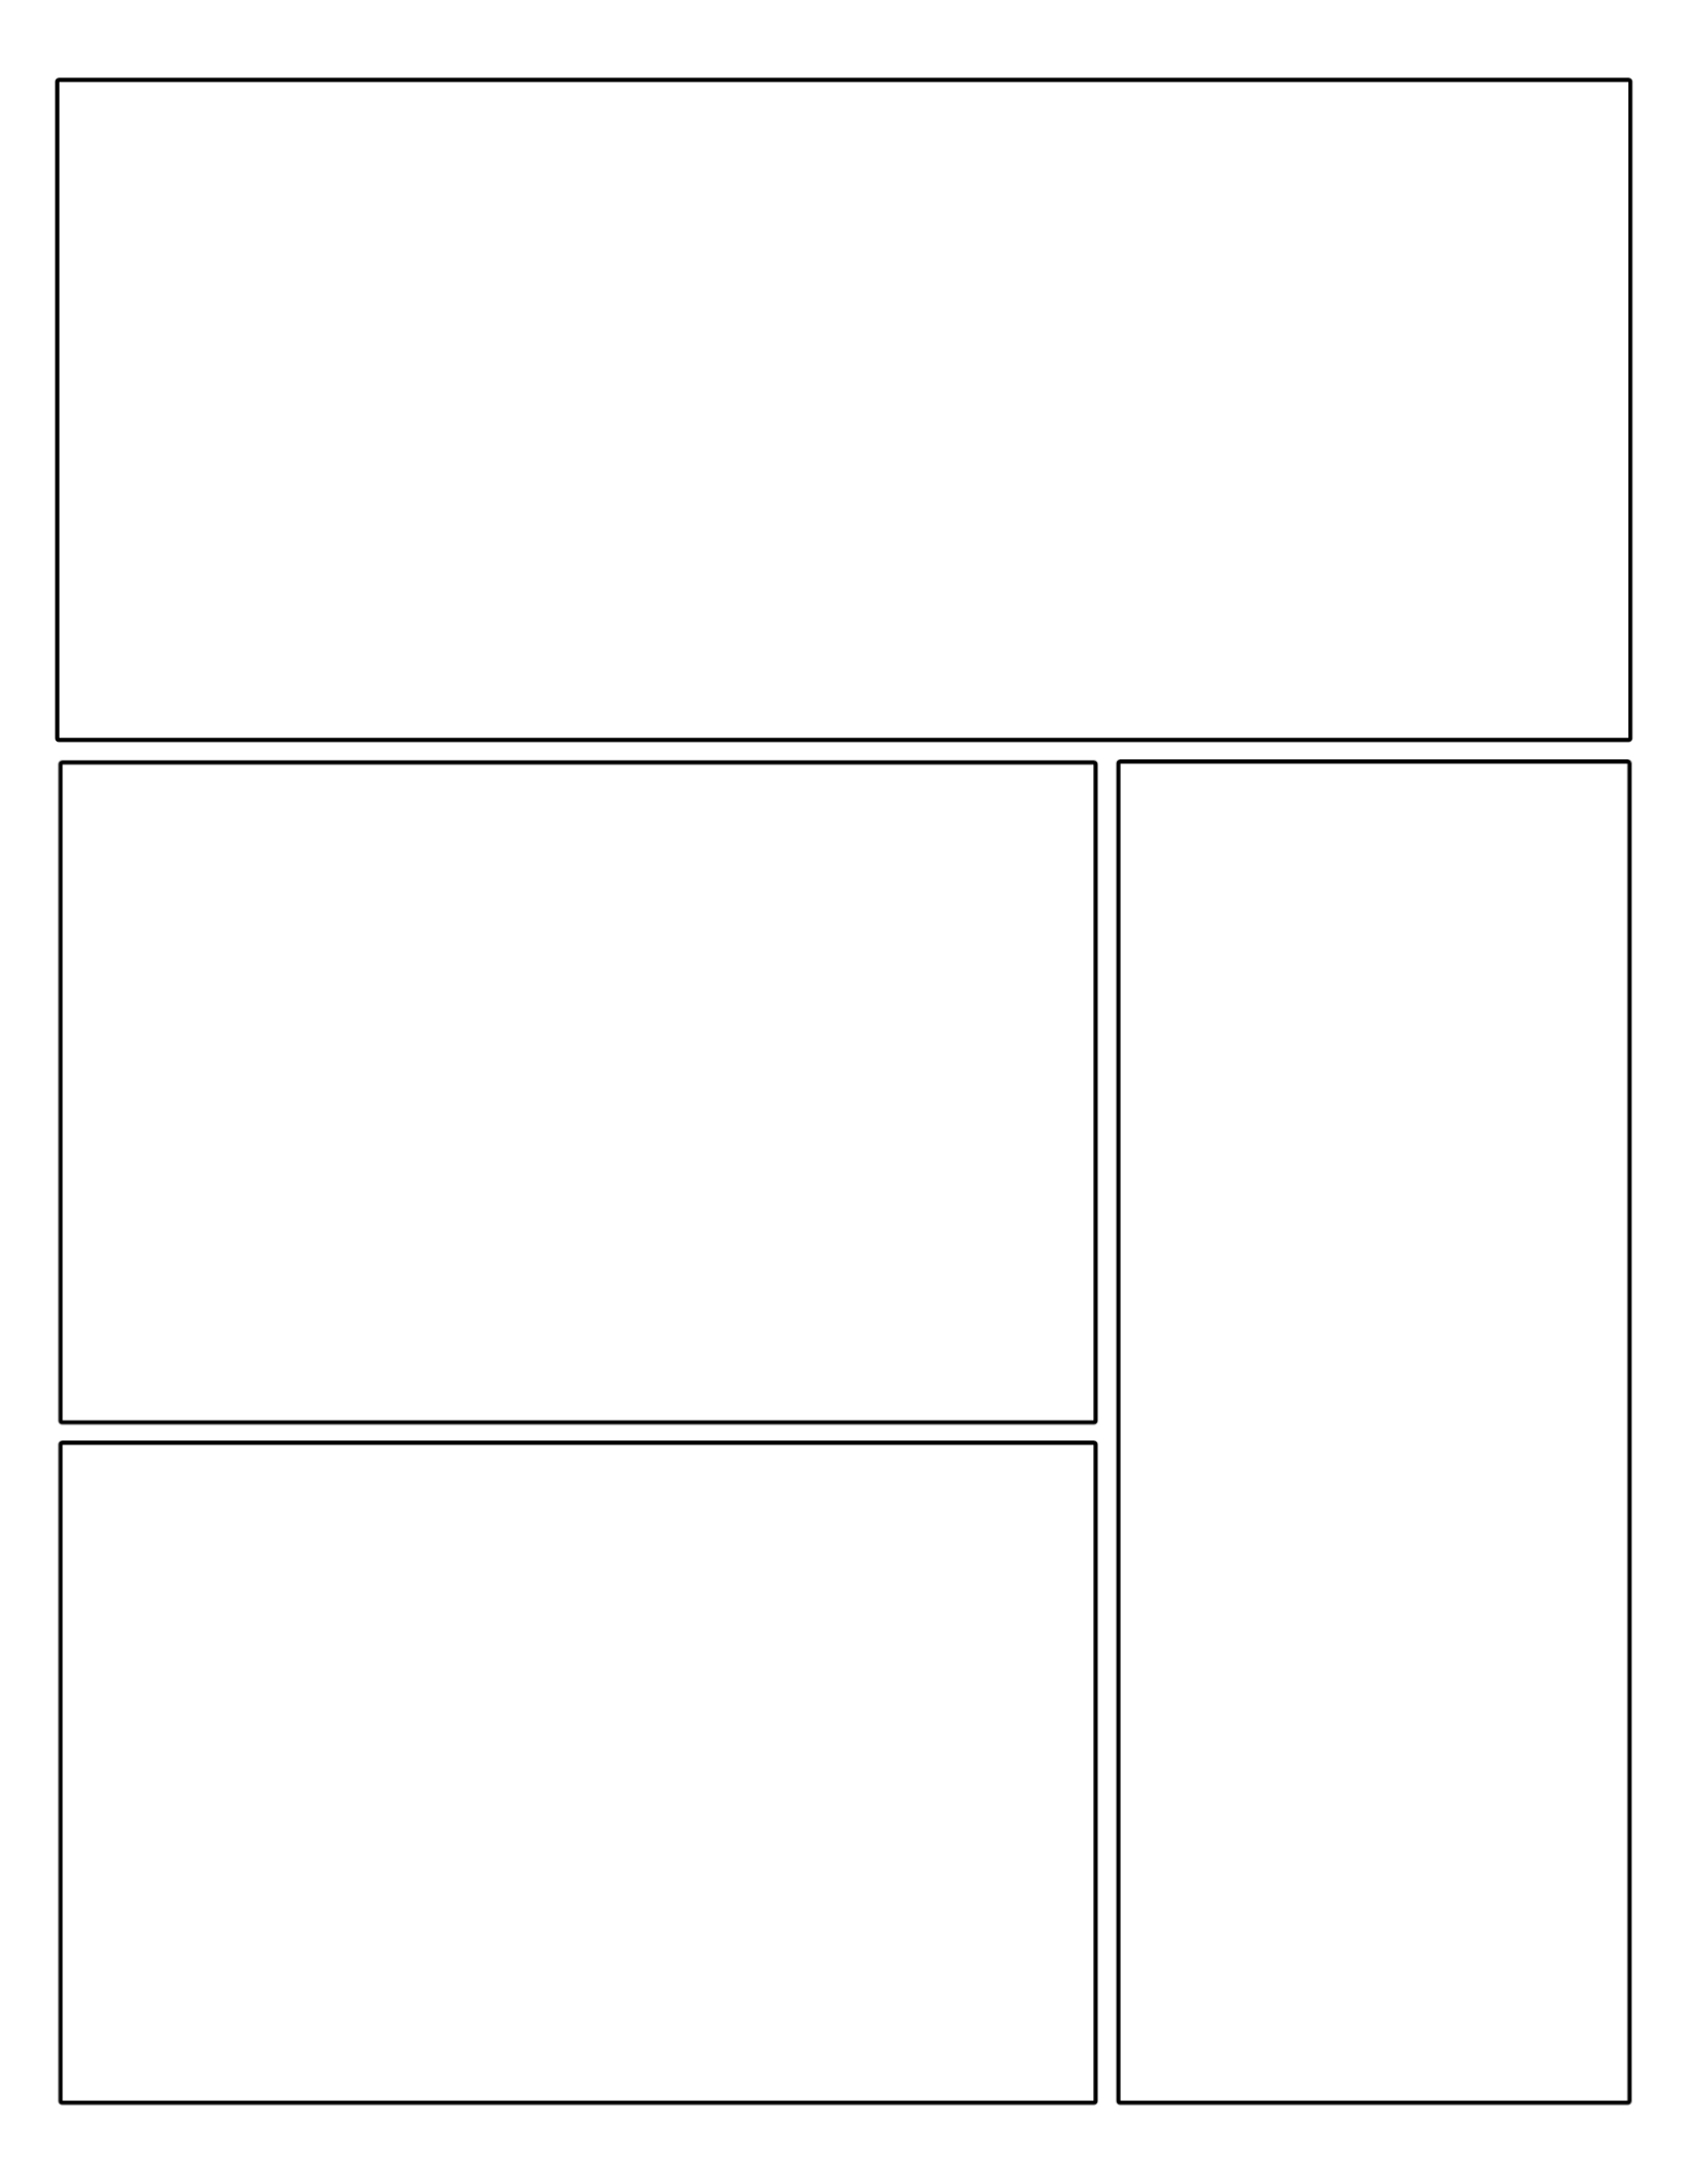 Free Printable Comic Strip Template Pages - Paper Trail Design With Regard To Printable Blank Comic Strip Template For Kids